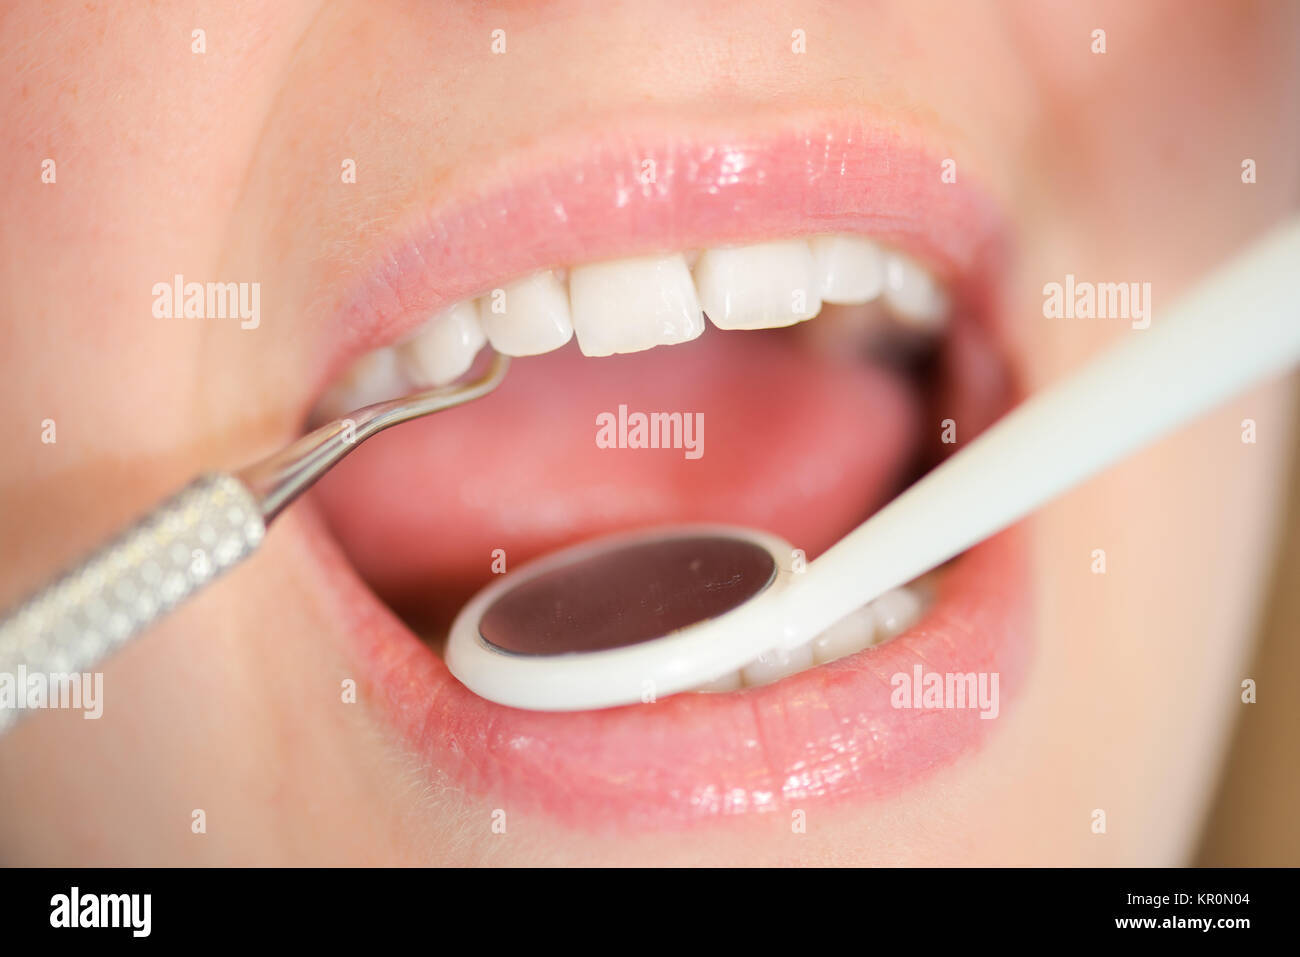 Dentist looking into a woman's mouth Stock Photo